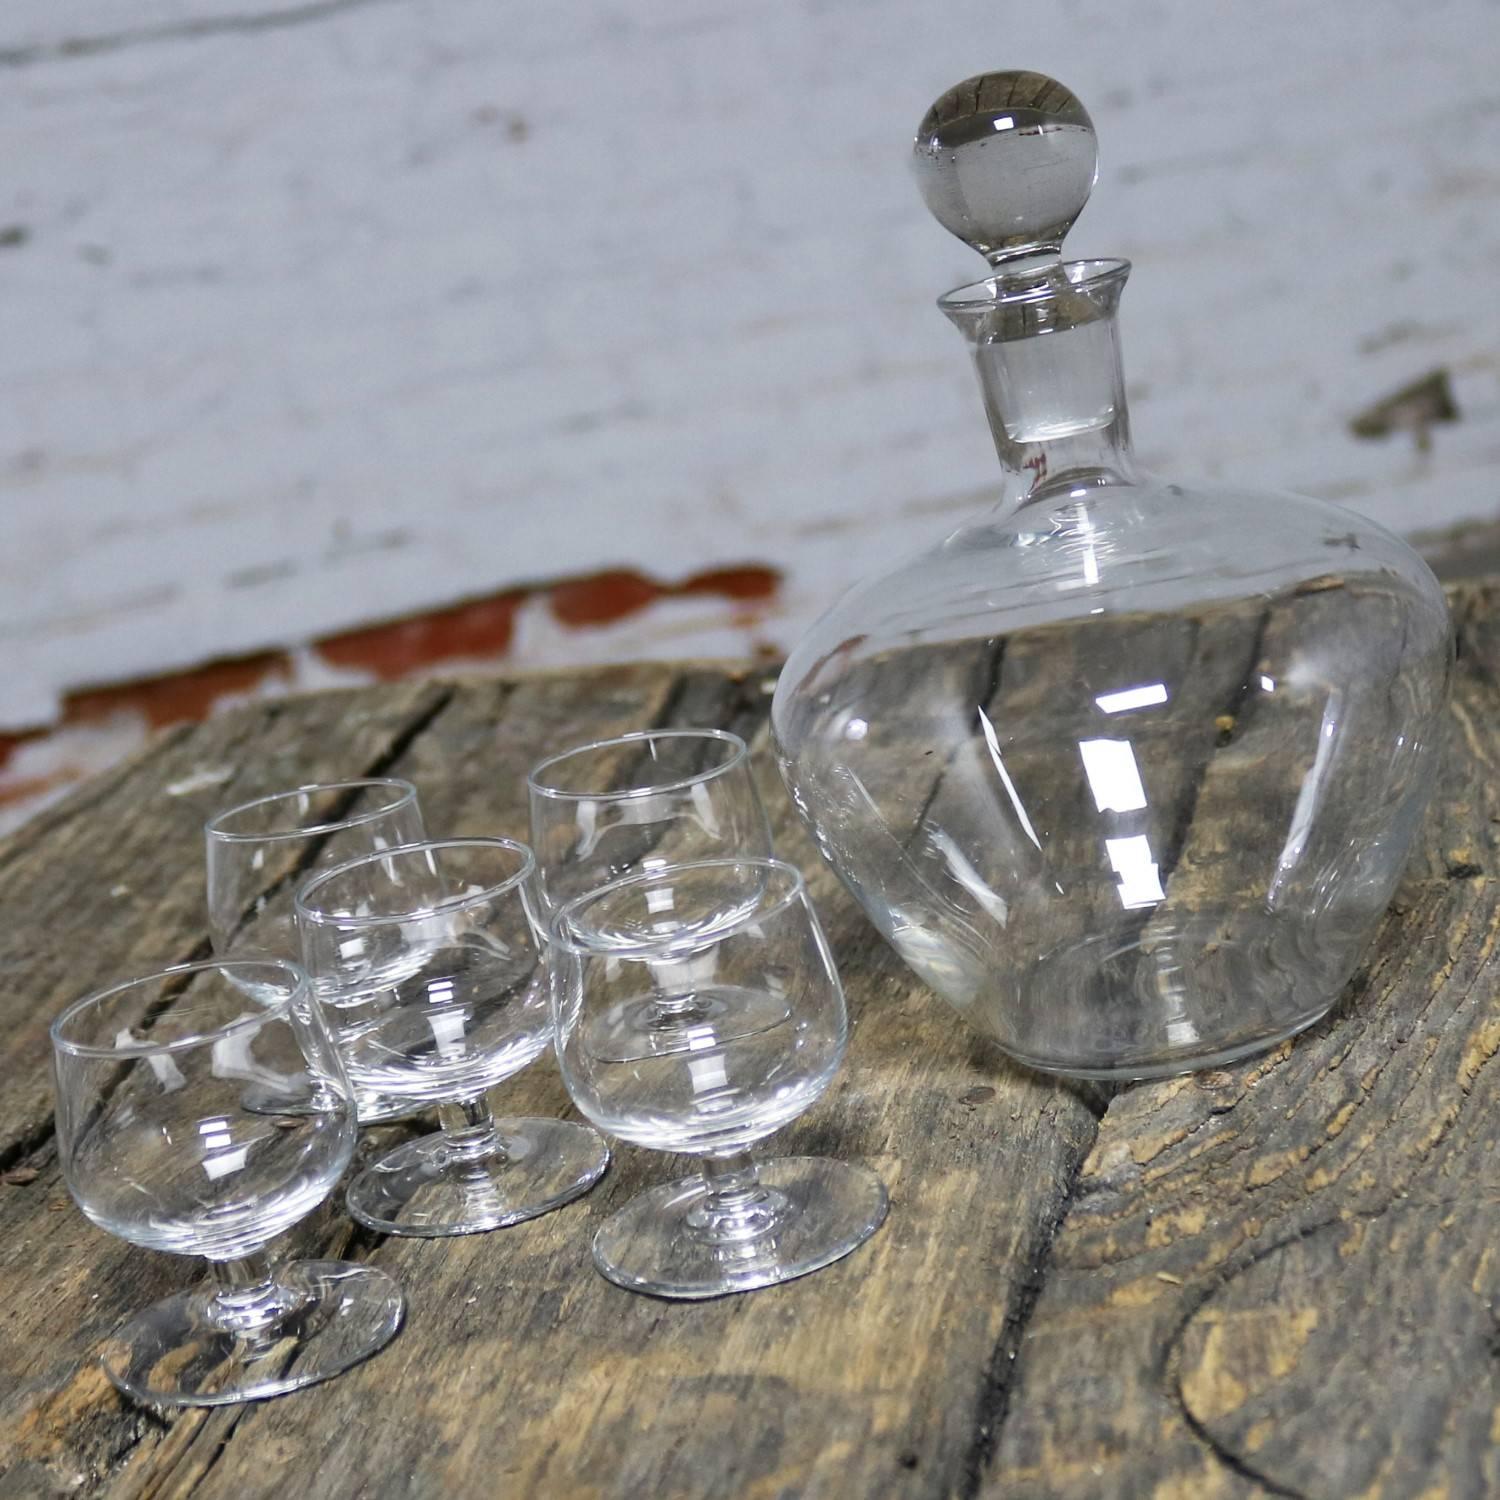 Handsome clear crystal Tinka decanter set with decanter and five glasses designed by A. D. Copier for Royal Leerdam Holland. The decanter and five glasses are all in fabulous vintage condition with no chips, cracks, or chiggers. This set comes with